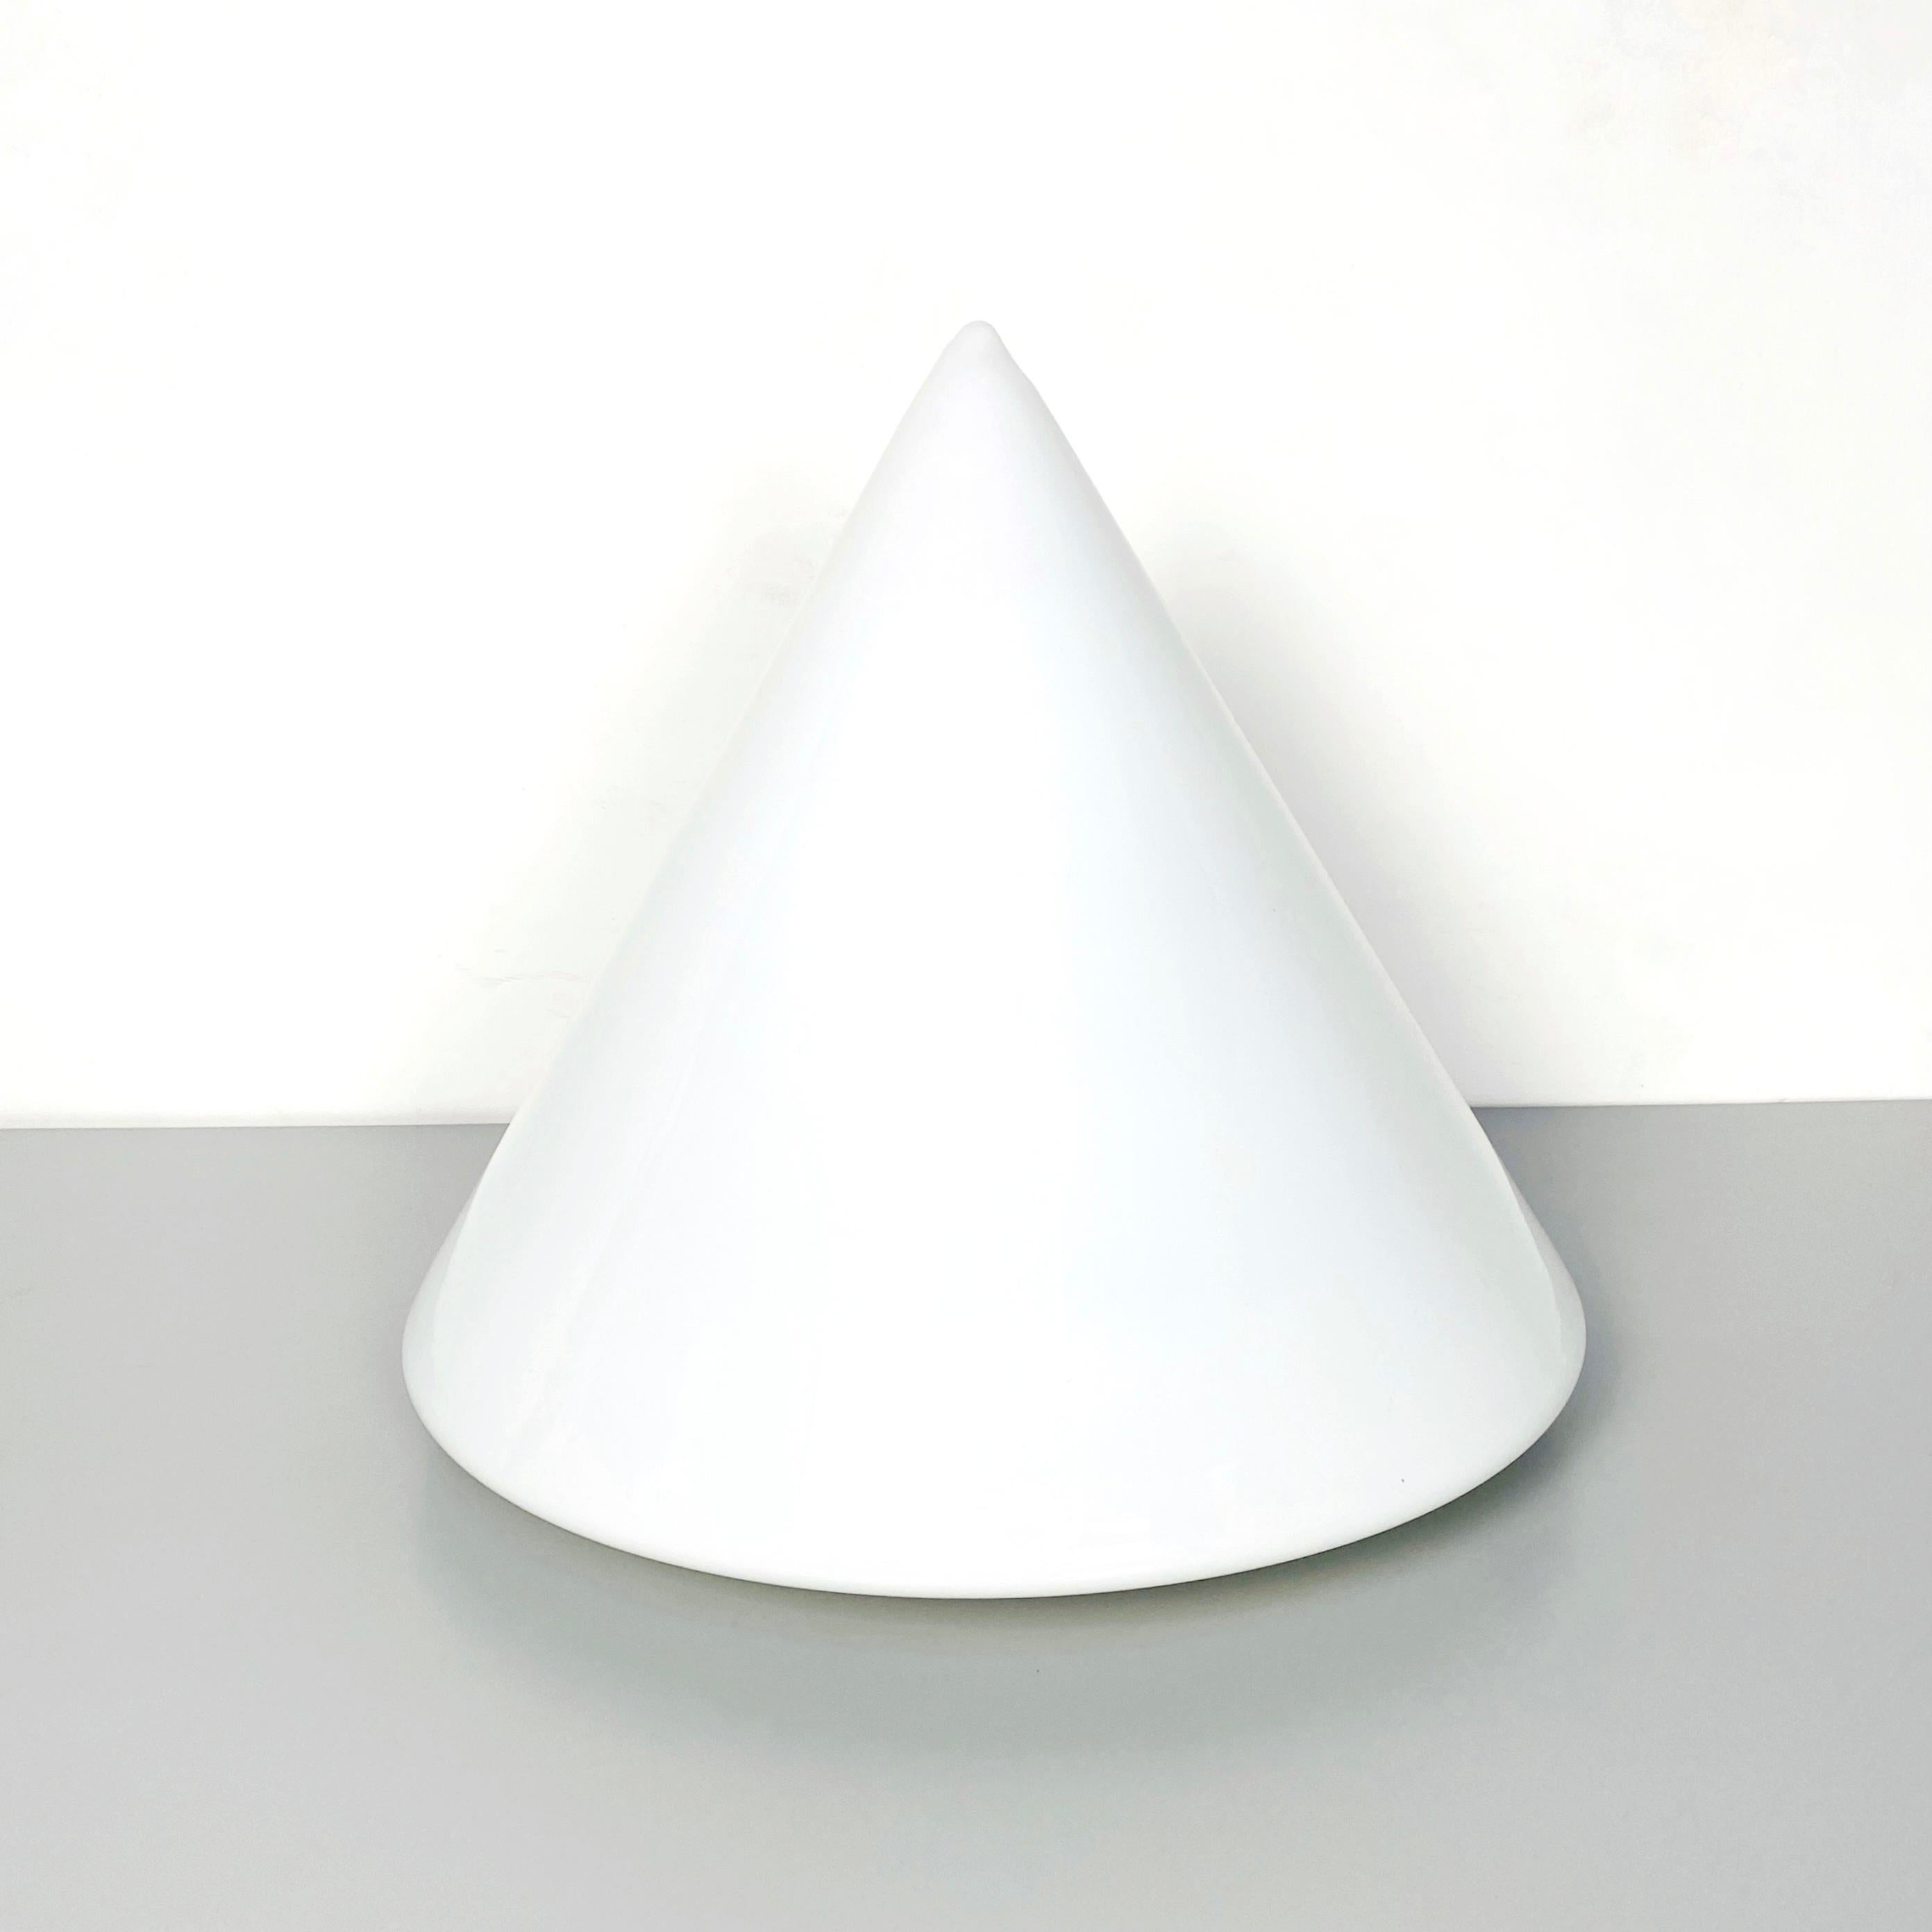 Italian Mid-Century Modern conical table lamp with double opal glossy glass, 1970s
Conical table lamp with double opal and glossy glass. 

Excellent condition 

Measures: 56 x 52 H cm.